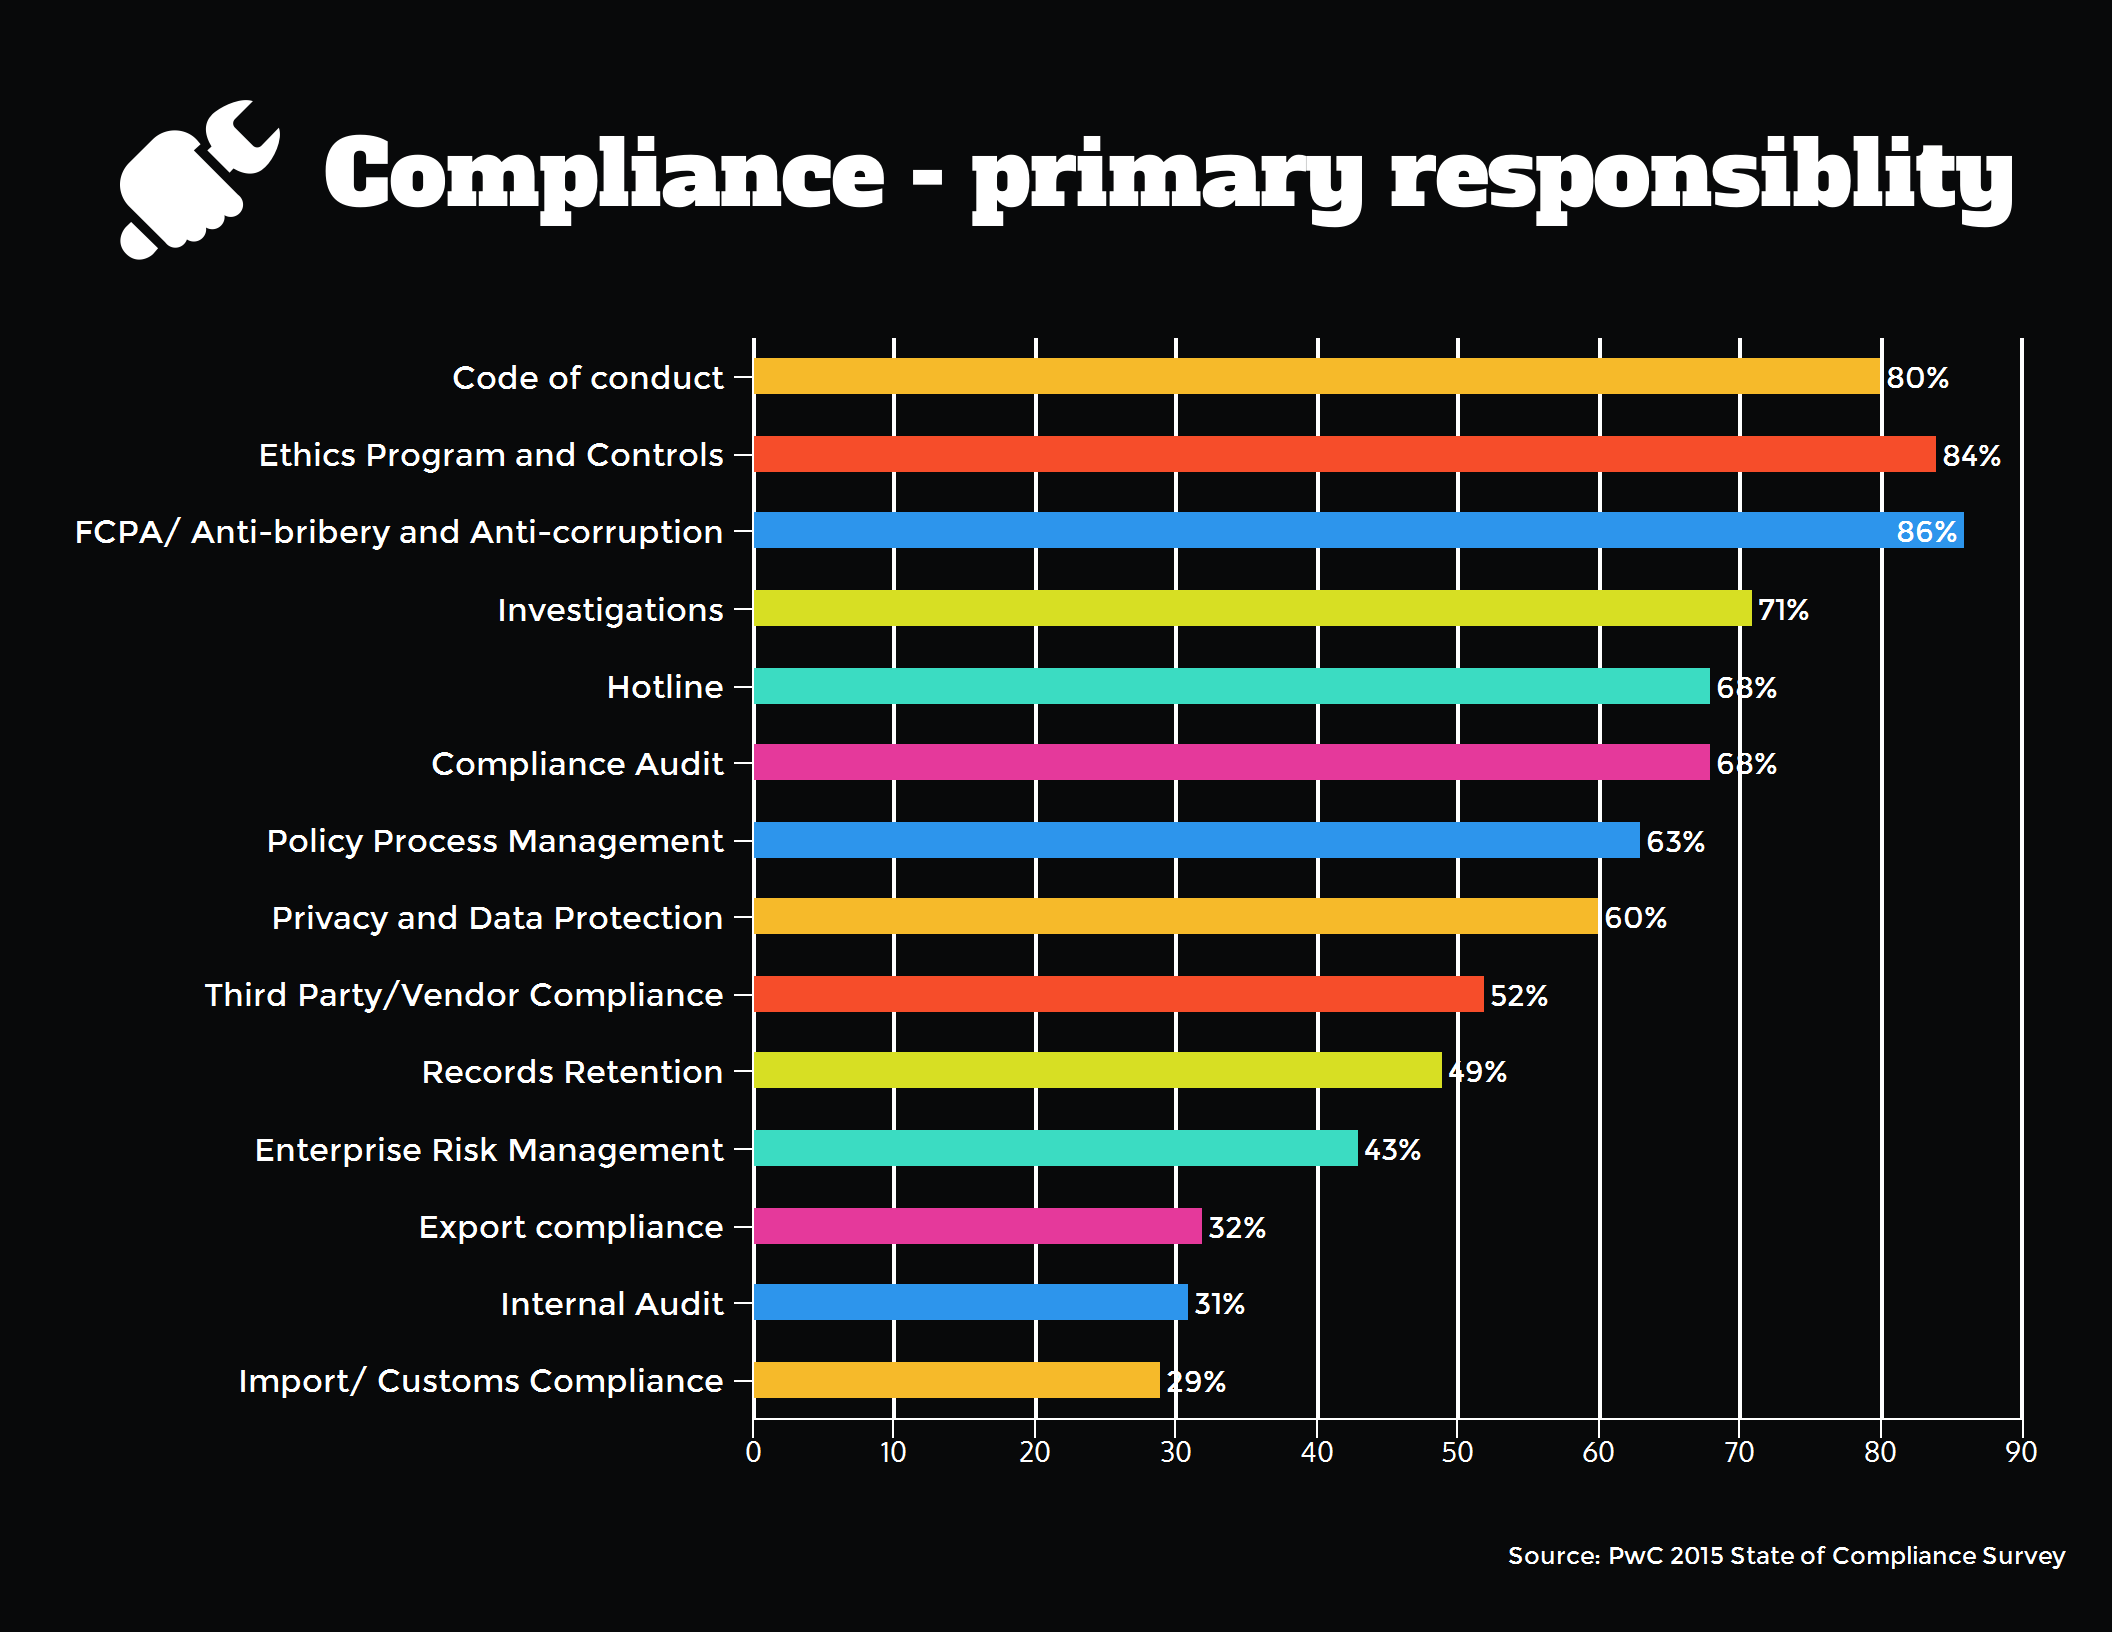 Bar graph indicating primary responsibilities of Chief Compliance Officers. Source: PwC 2015 State of Compliance Survey.